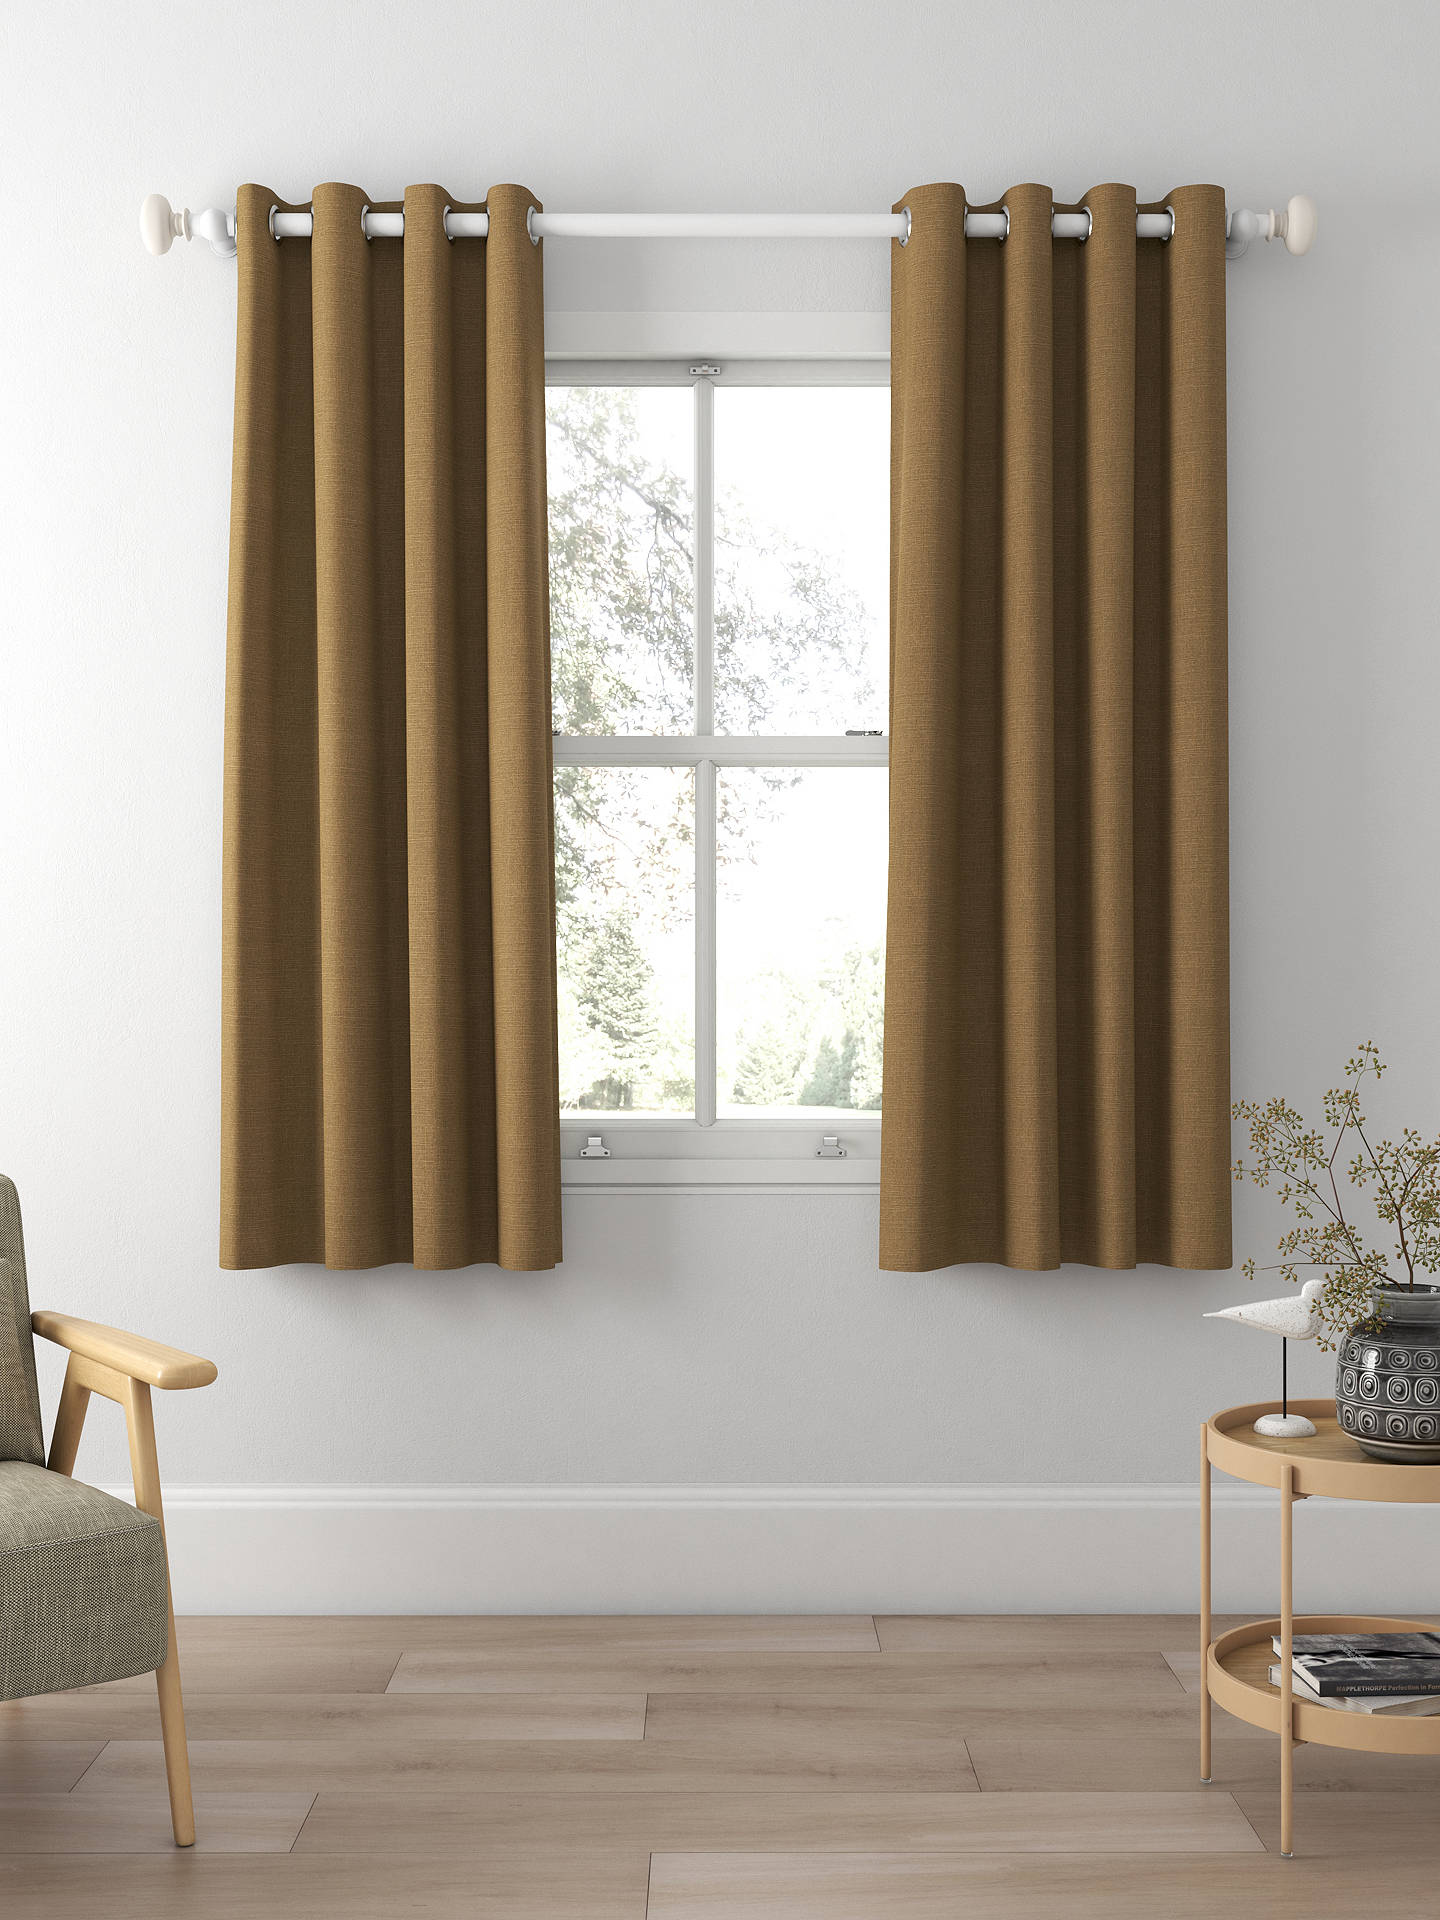 Sanderson Tuscany II Made to Measure Curtains, Hay